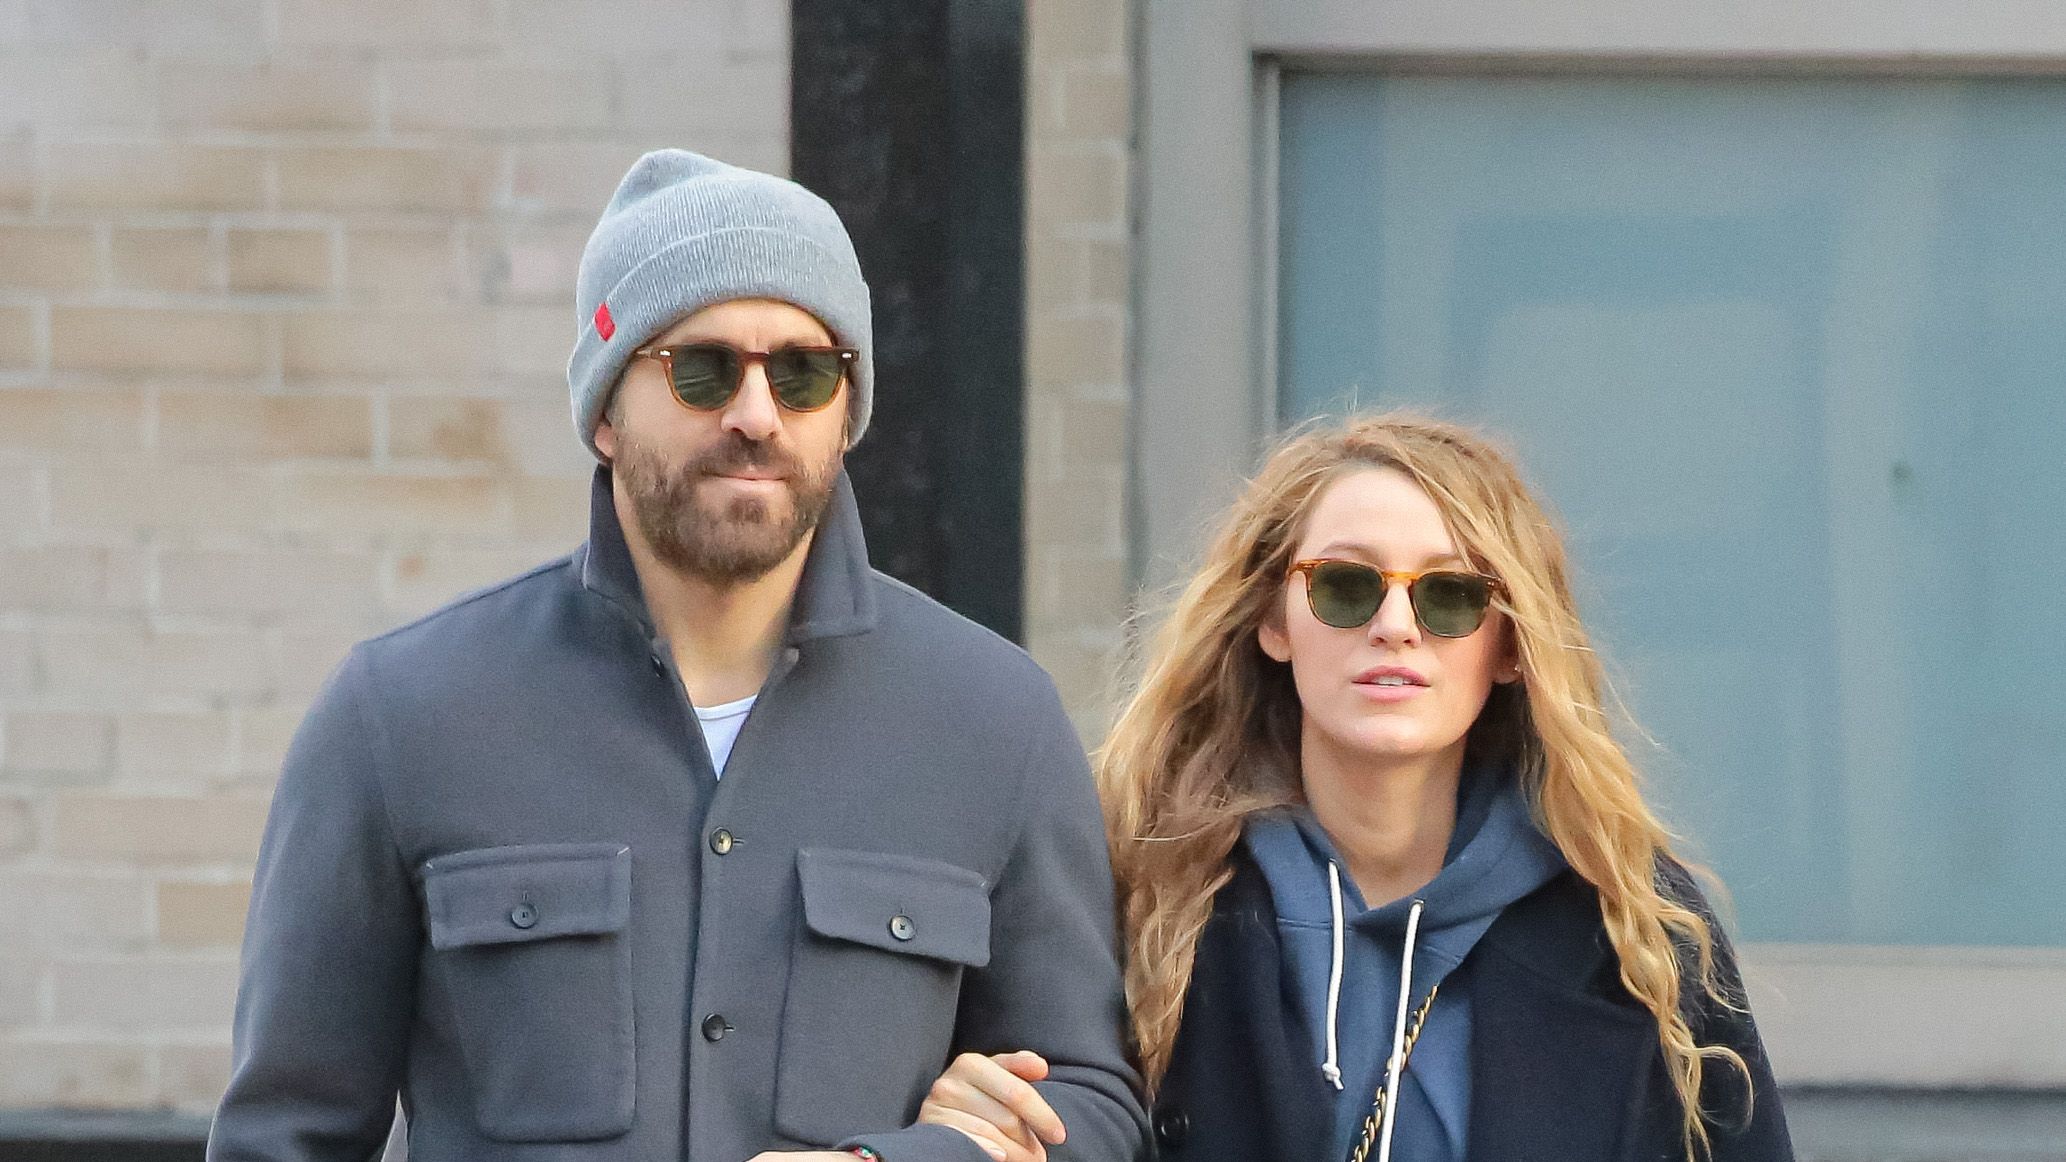 Blake Lively Shares the 'Rules' She and Ryan Reynolds Laid Down at